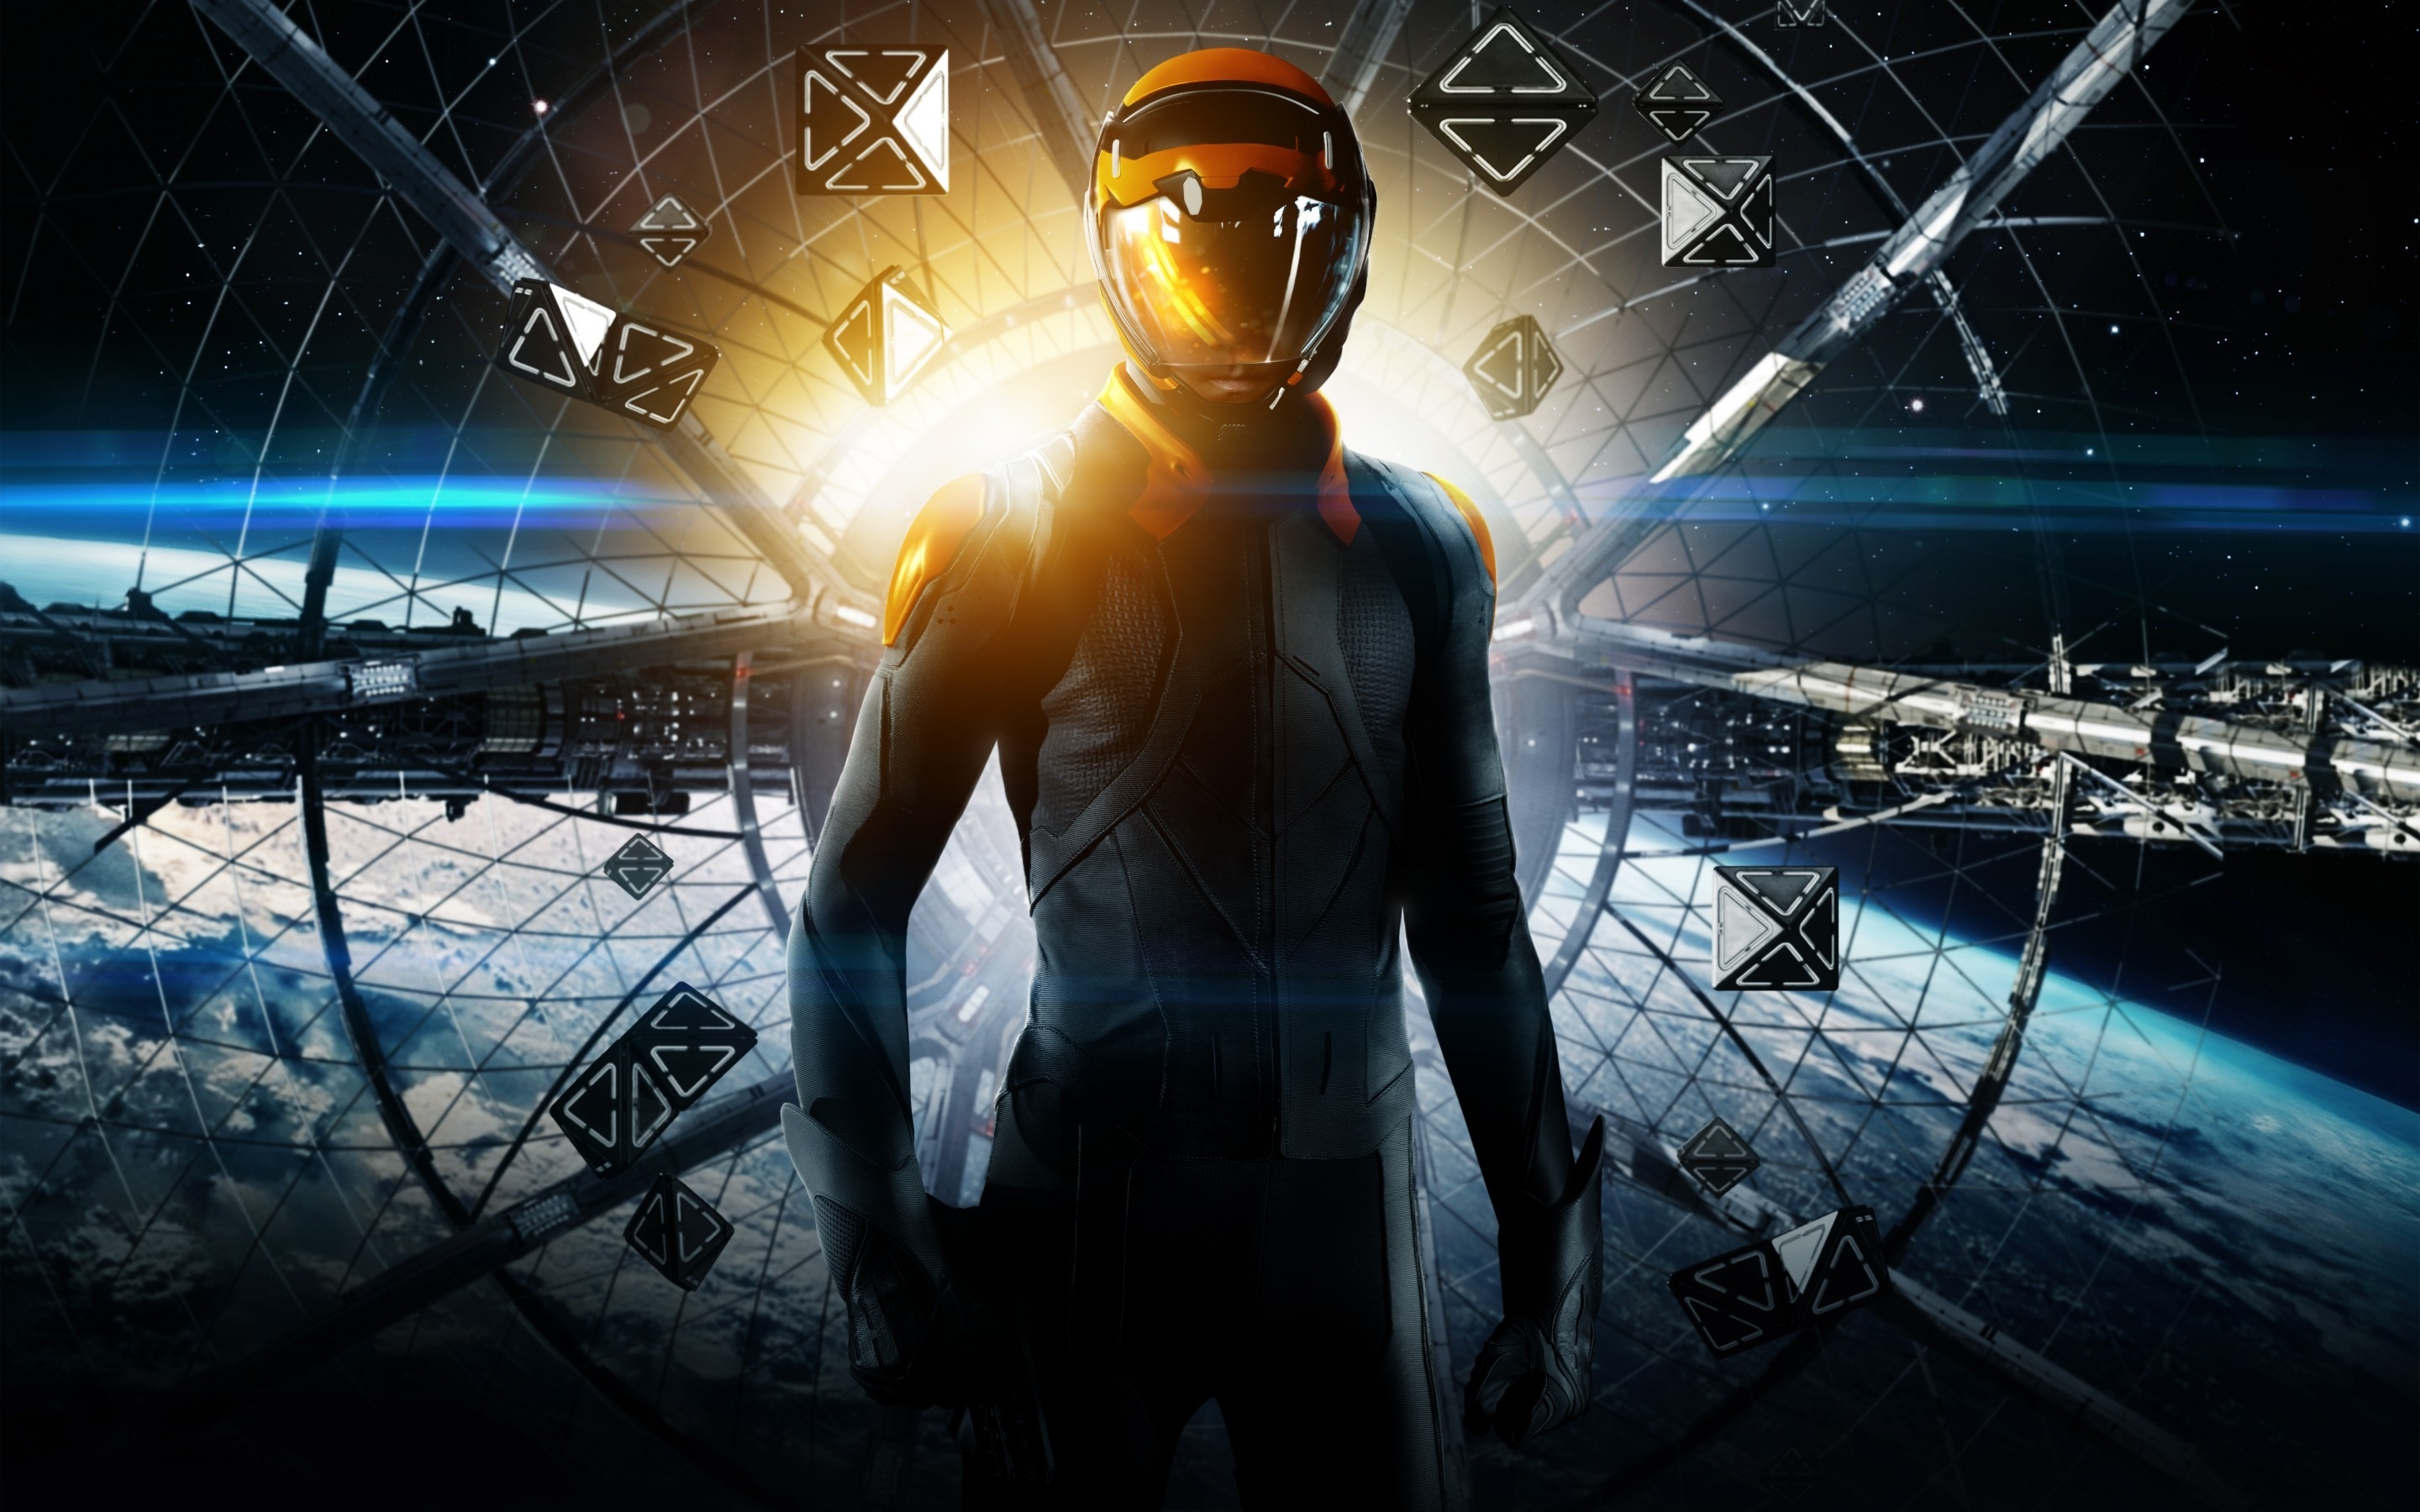 Ender's Game Poster for 2880 x 1800 Retina Display resolution